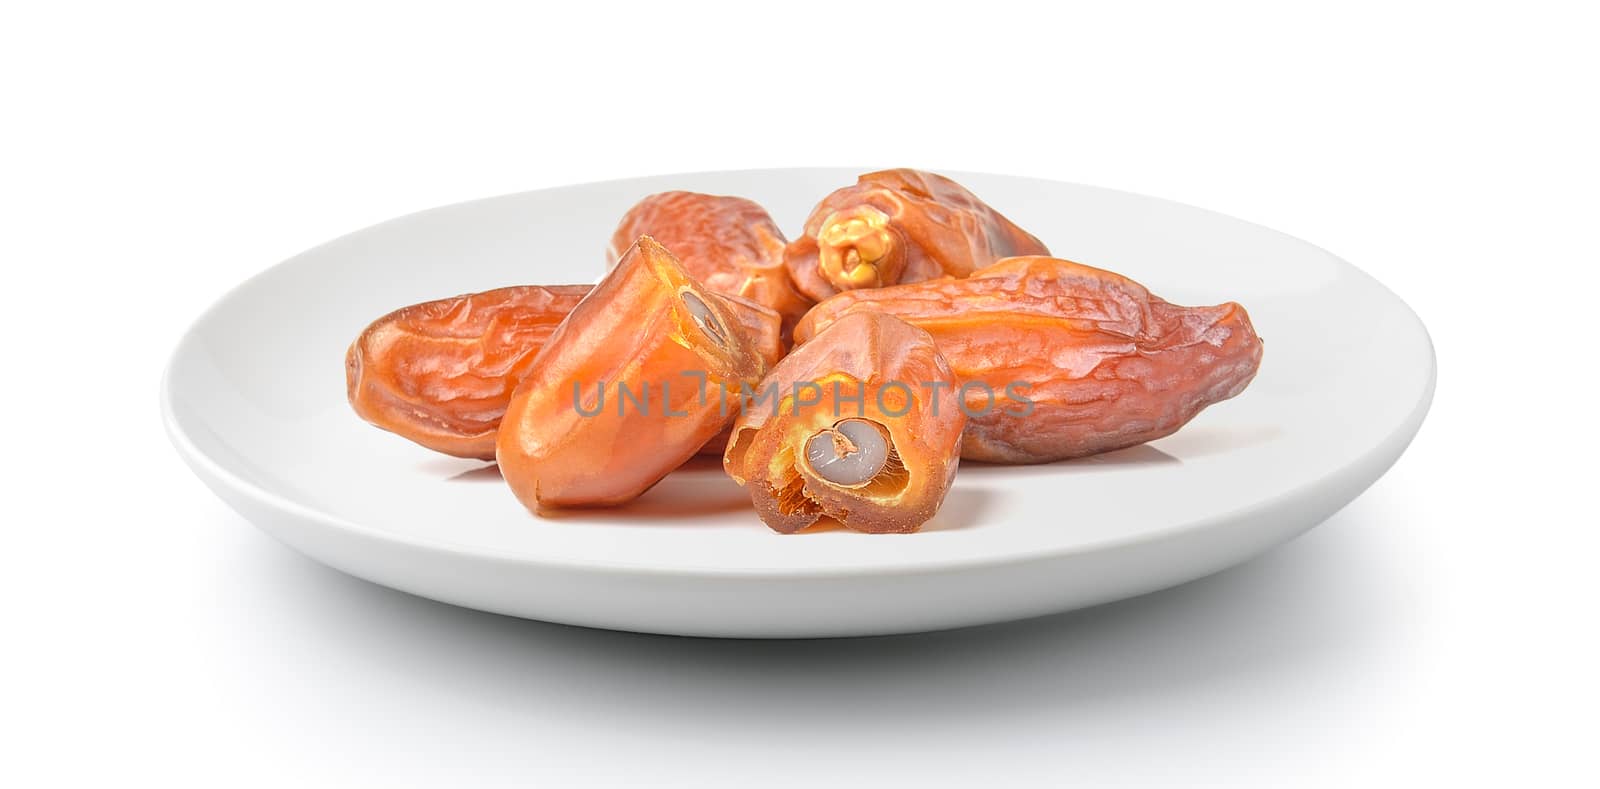 date palm in a plate isolated on a white background